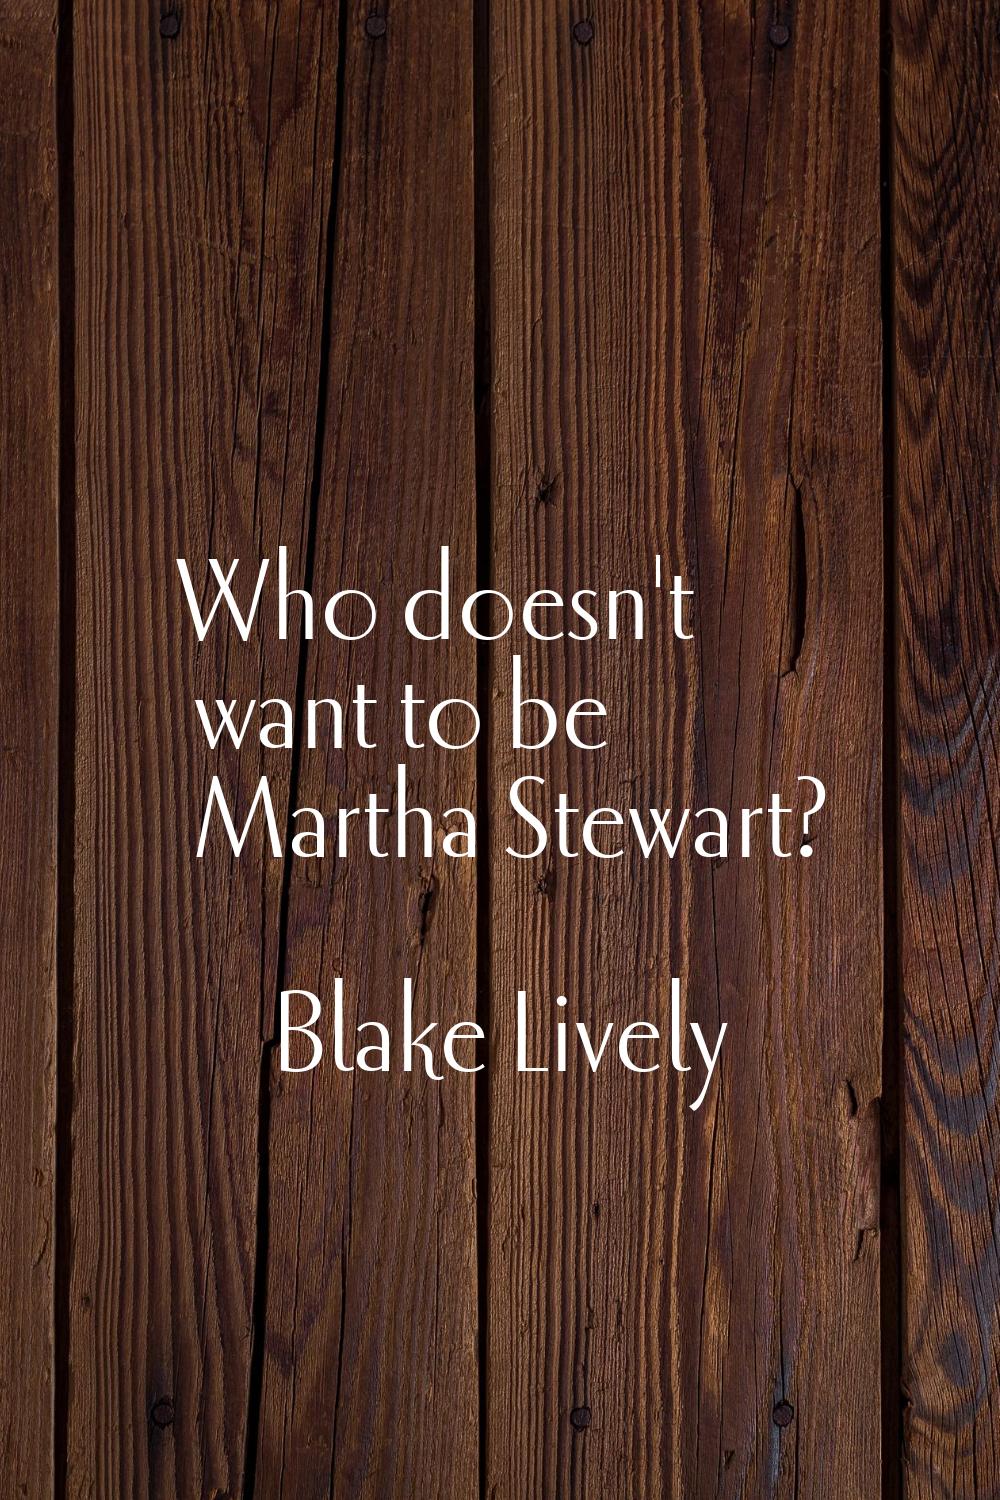 Who doesn't want to be Martha Stewart?